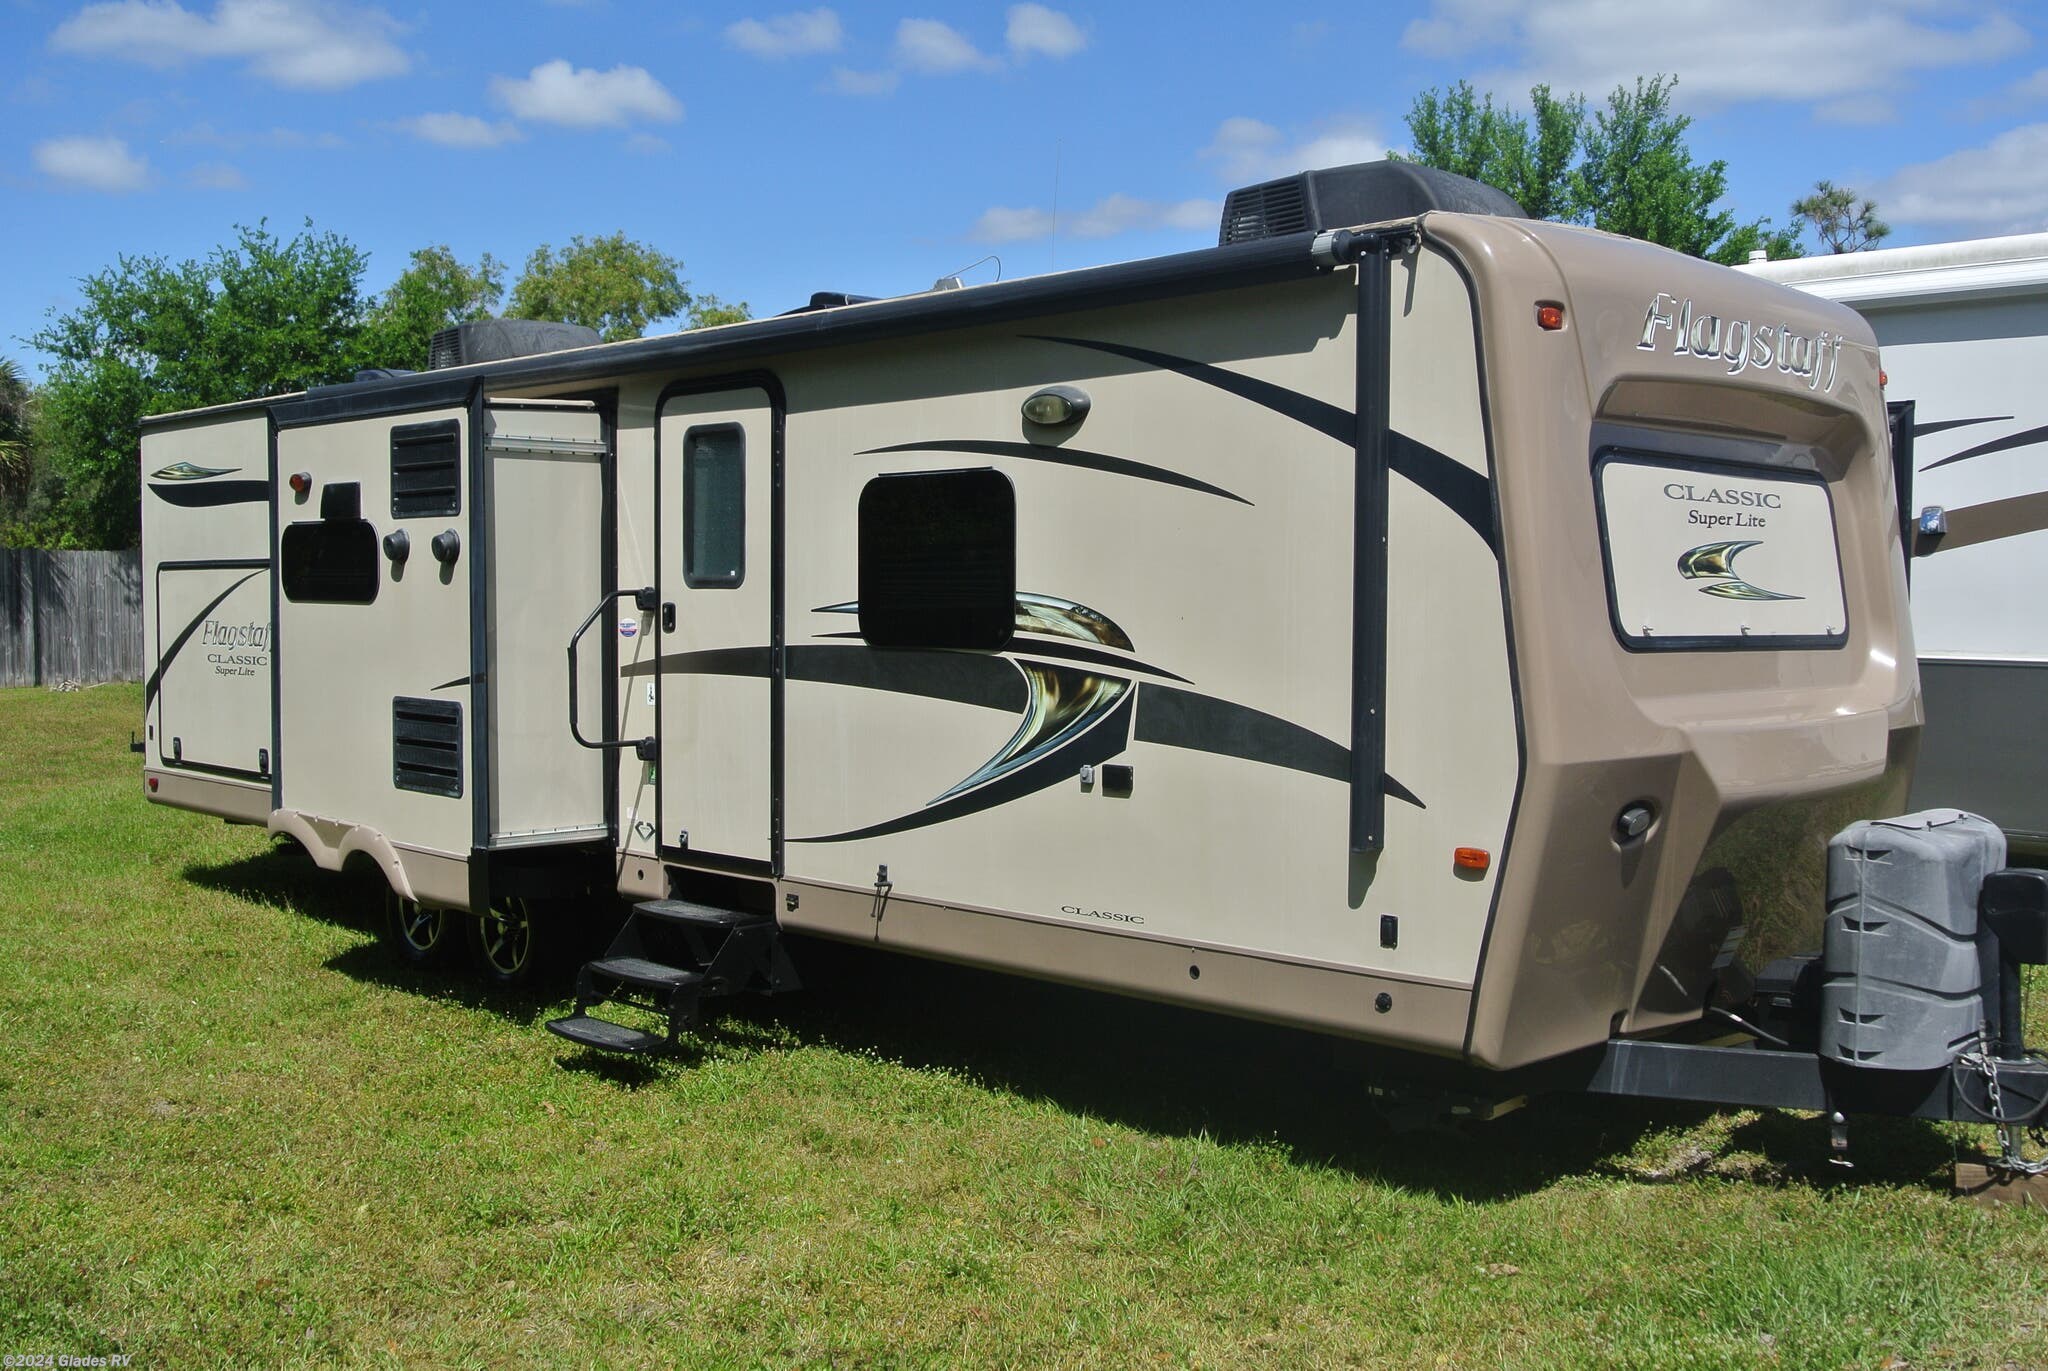 2016 Forest River Flagstaff Classic Super Lite 829IKRBS RV for Sale in Fort Myers, FL 33912 2016 Forest River Flagstaff Classic Super Lite